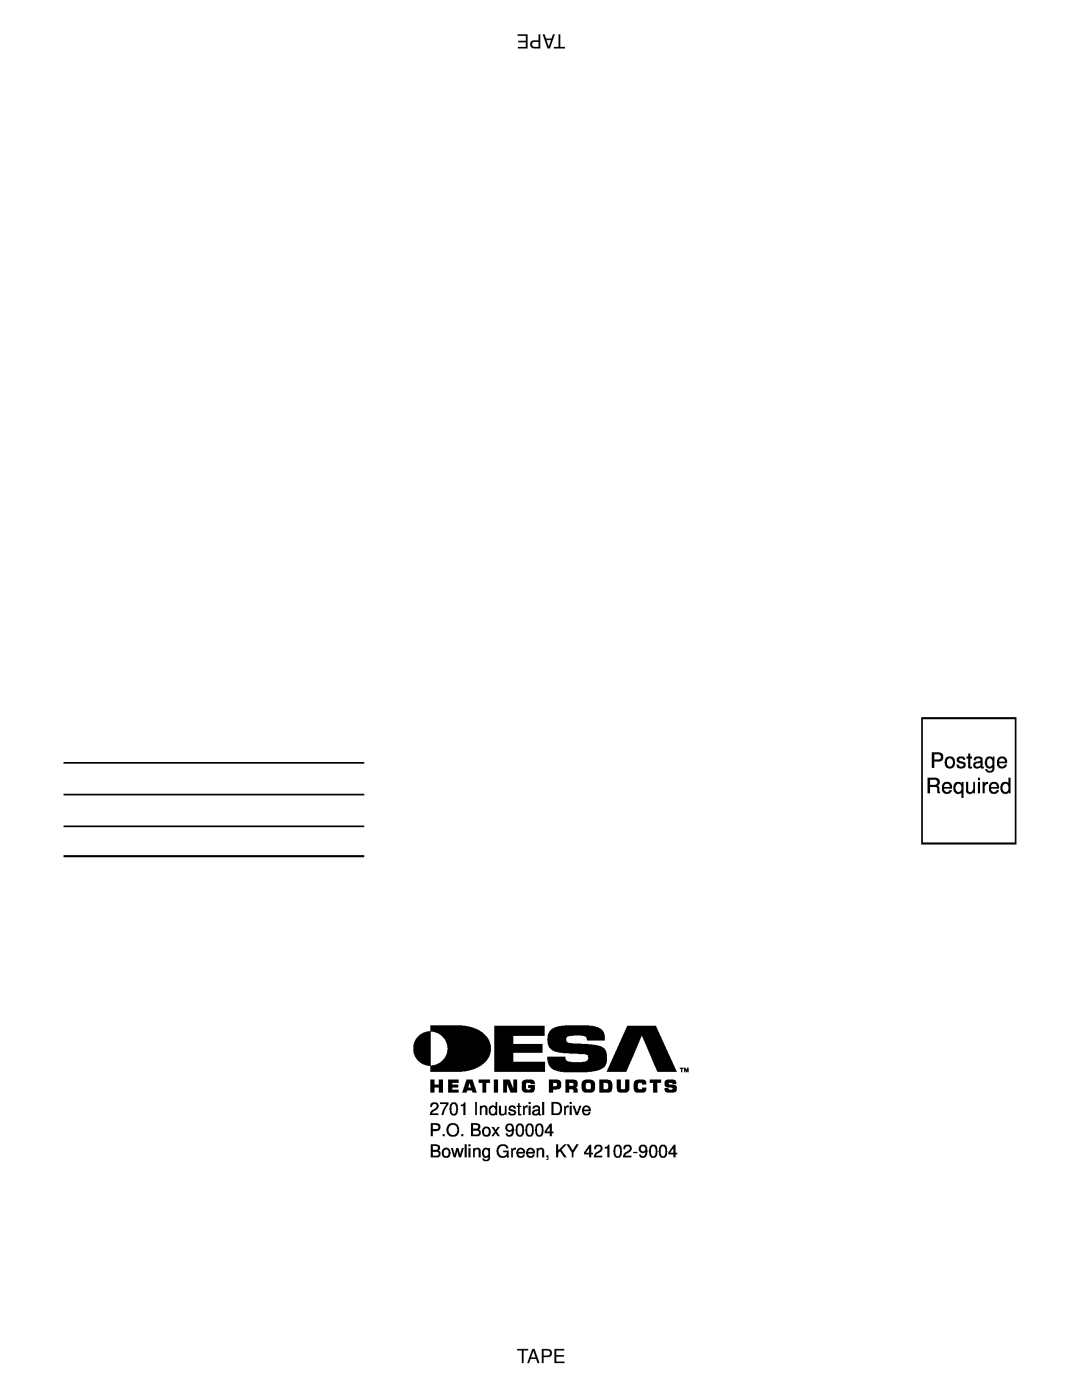 Desa LSL3124N installation manual Postage Required, Industrial Drive P.O. Box Bowling Green, KY, Tape 